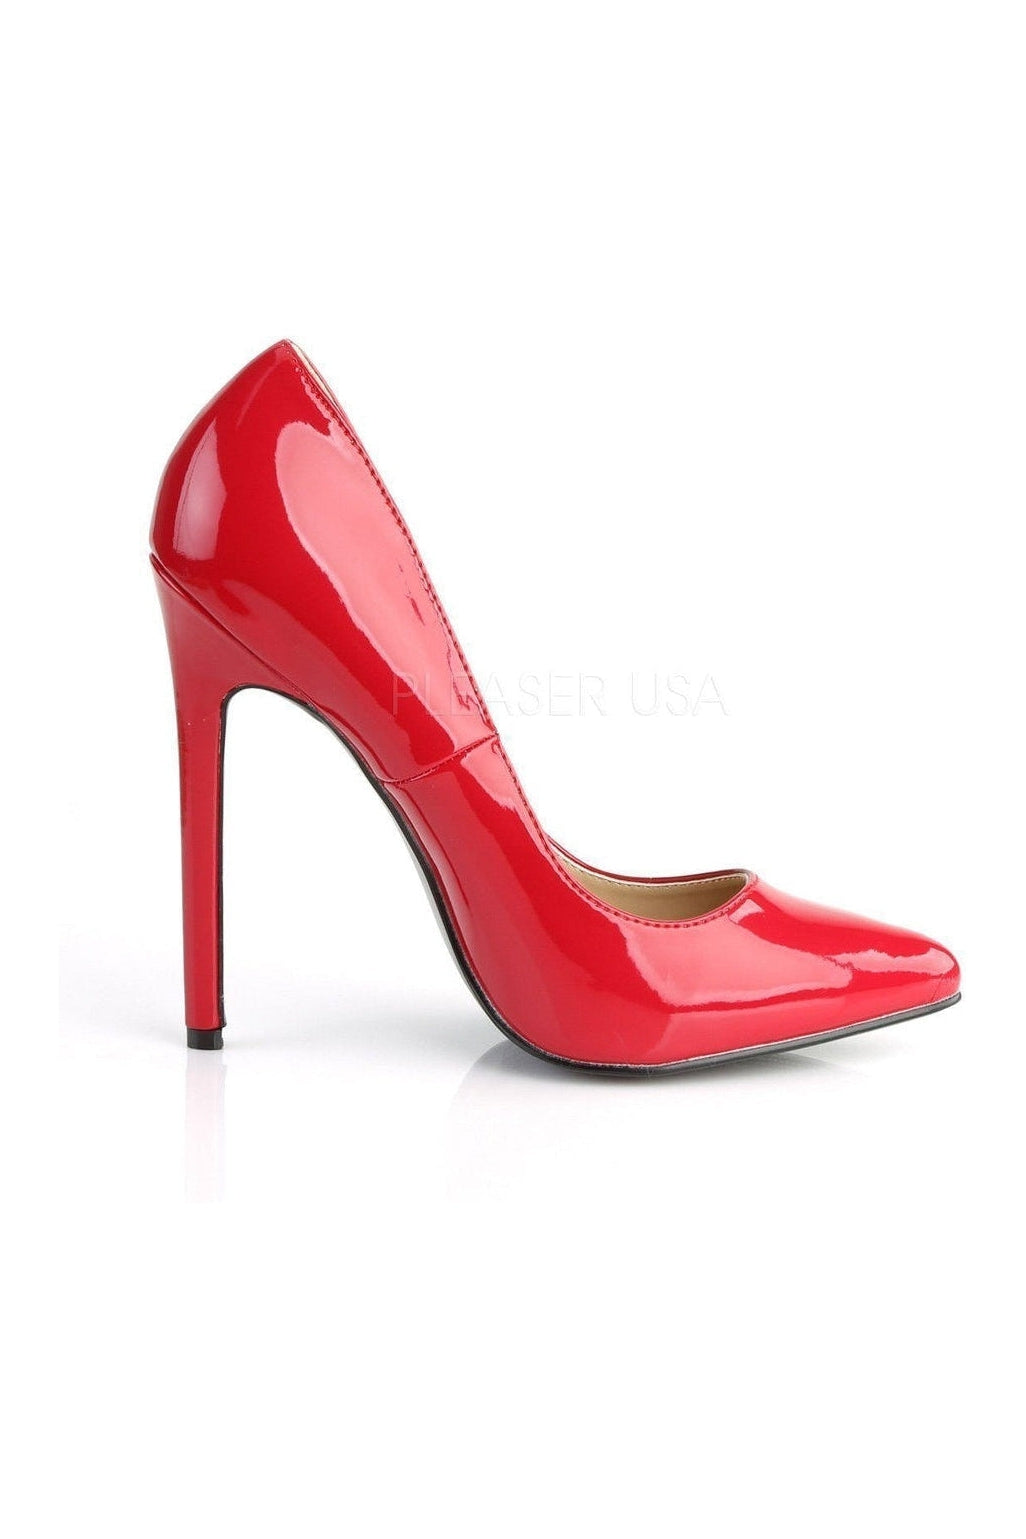 SEXY-20 Pump | Red Patent-Pleaser-Pumps-SEXYSHOES.COM